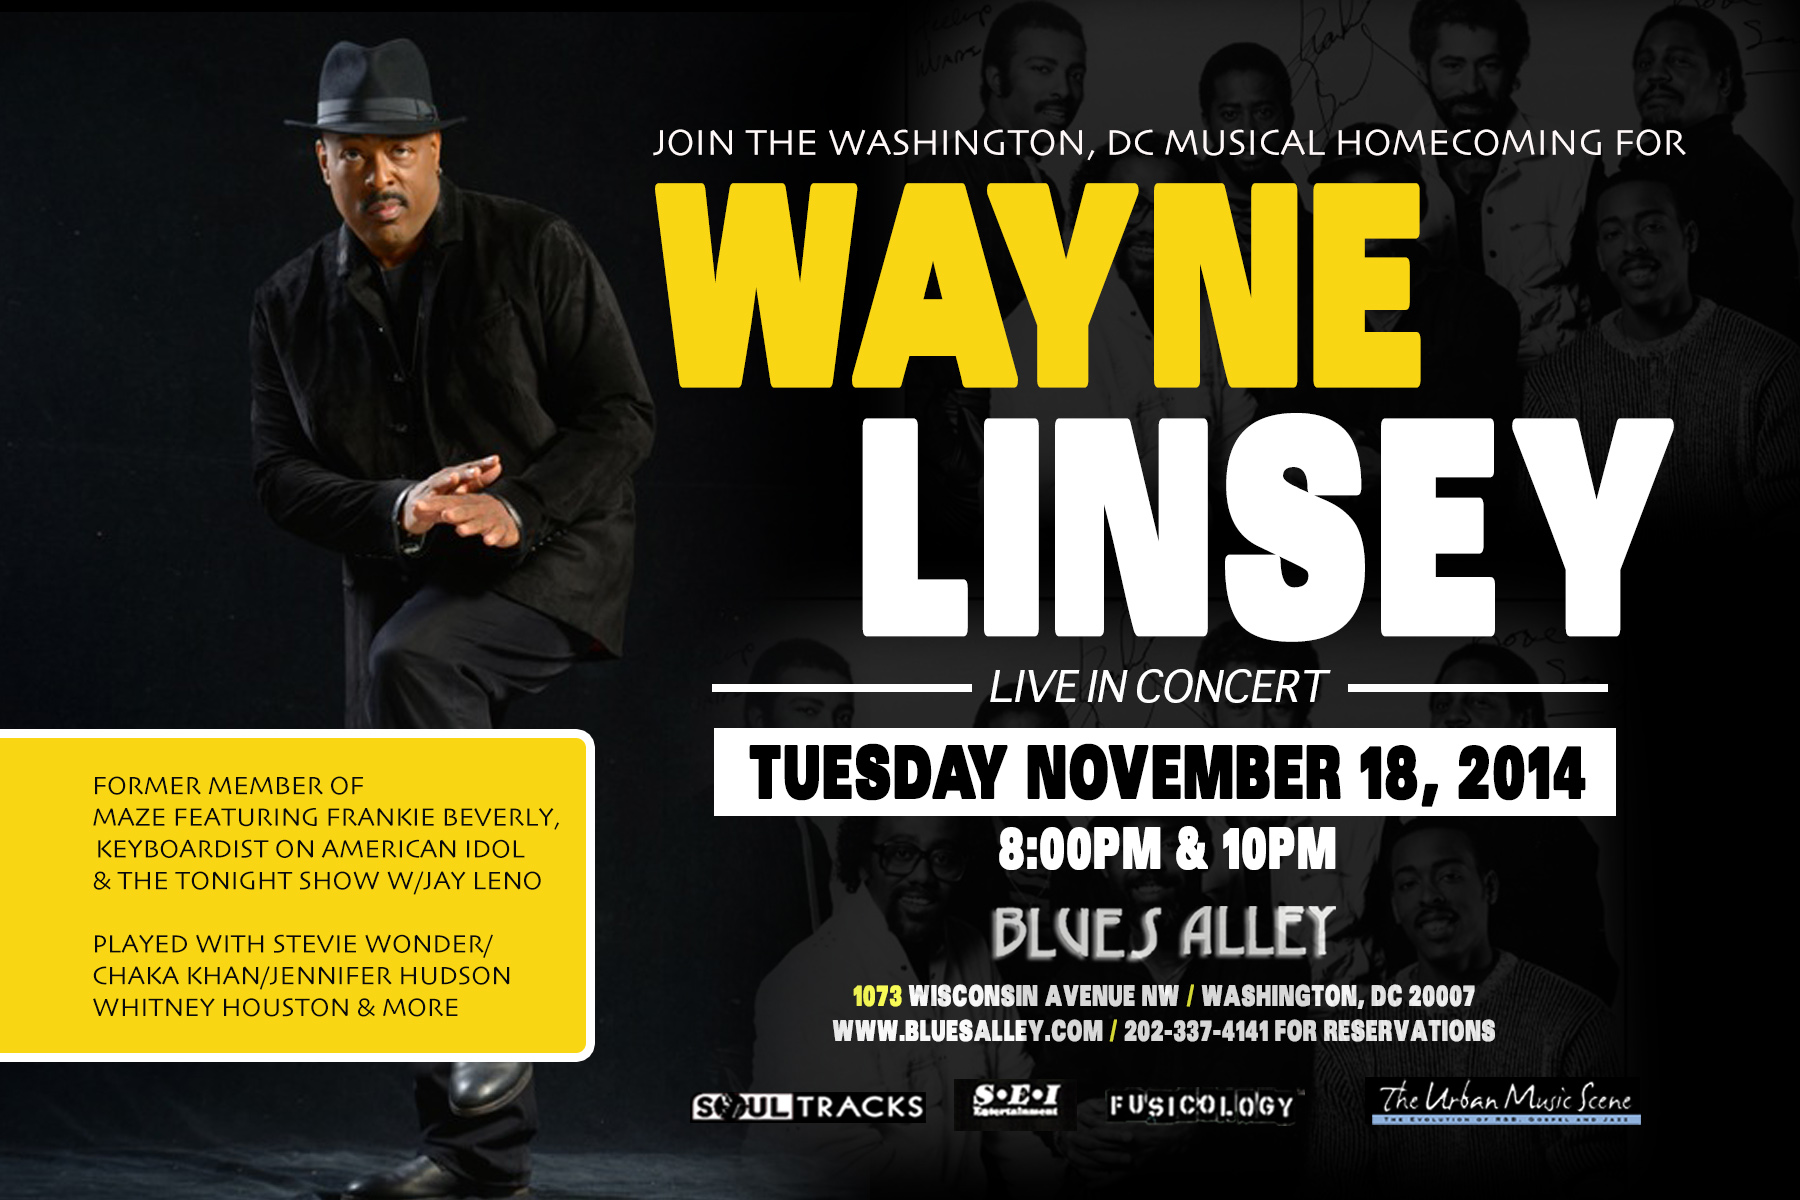 Wayne Linsey LIVE at Blues Alley